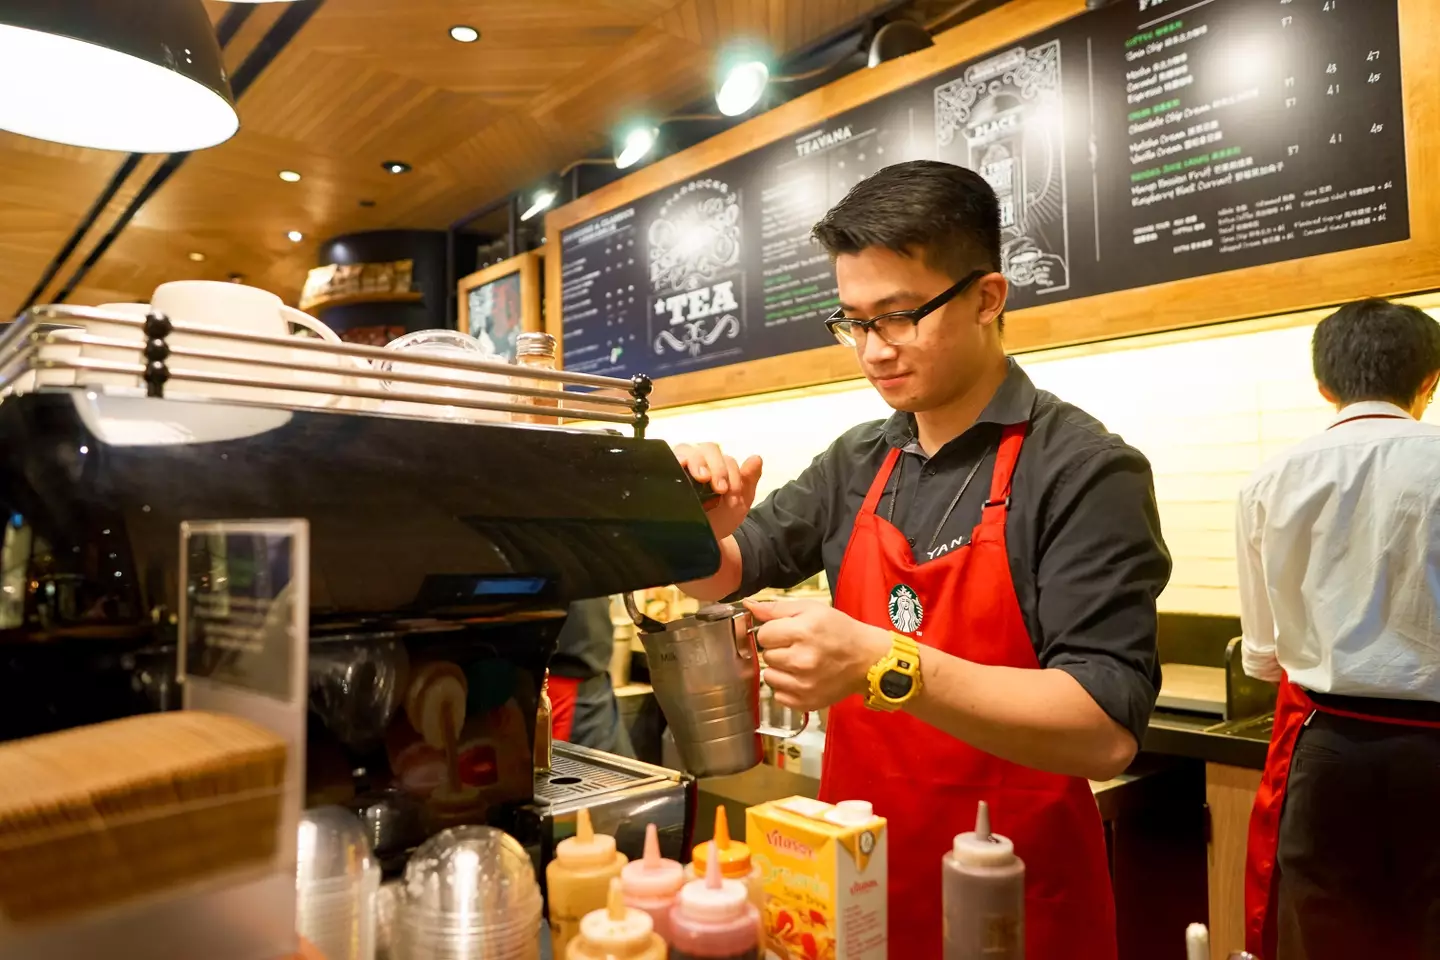 A Starbucks worker in a red apron.